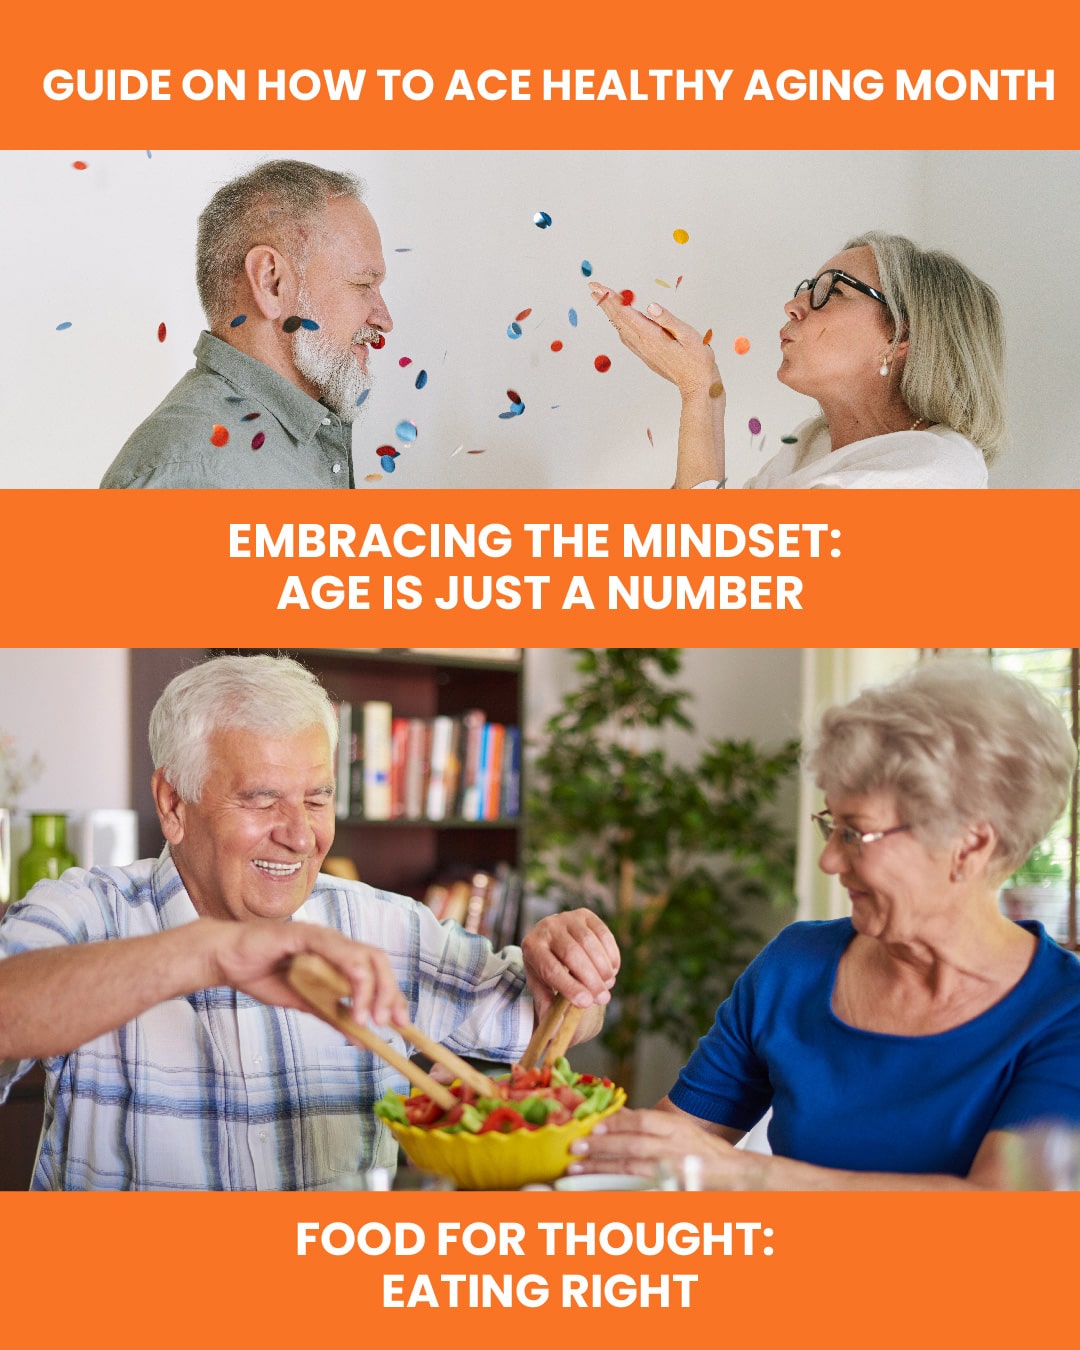 Top: Elderly couple celebrating with 'Embracing the Mindset: Age is Just a Number' title. Bottom: Elderly couple serving salad with 'Food for Thought: Eating Right' title